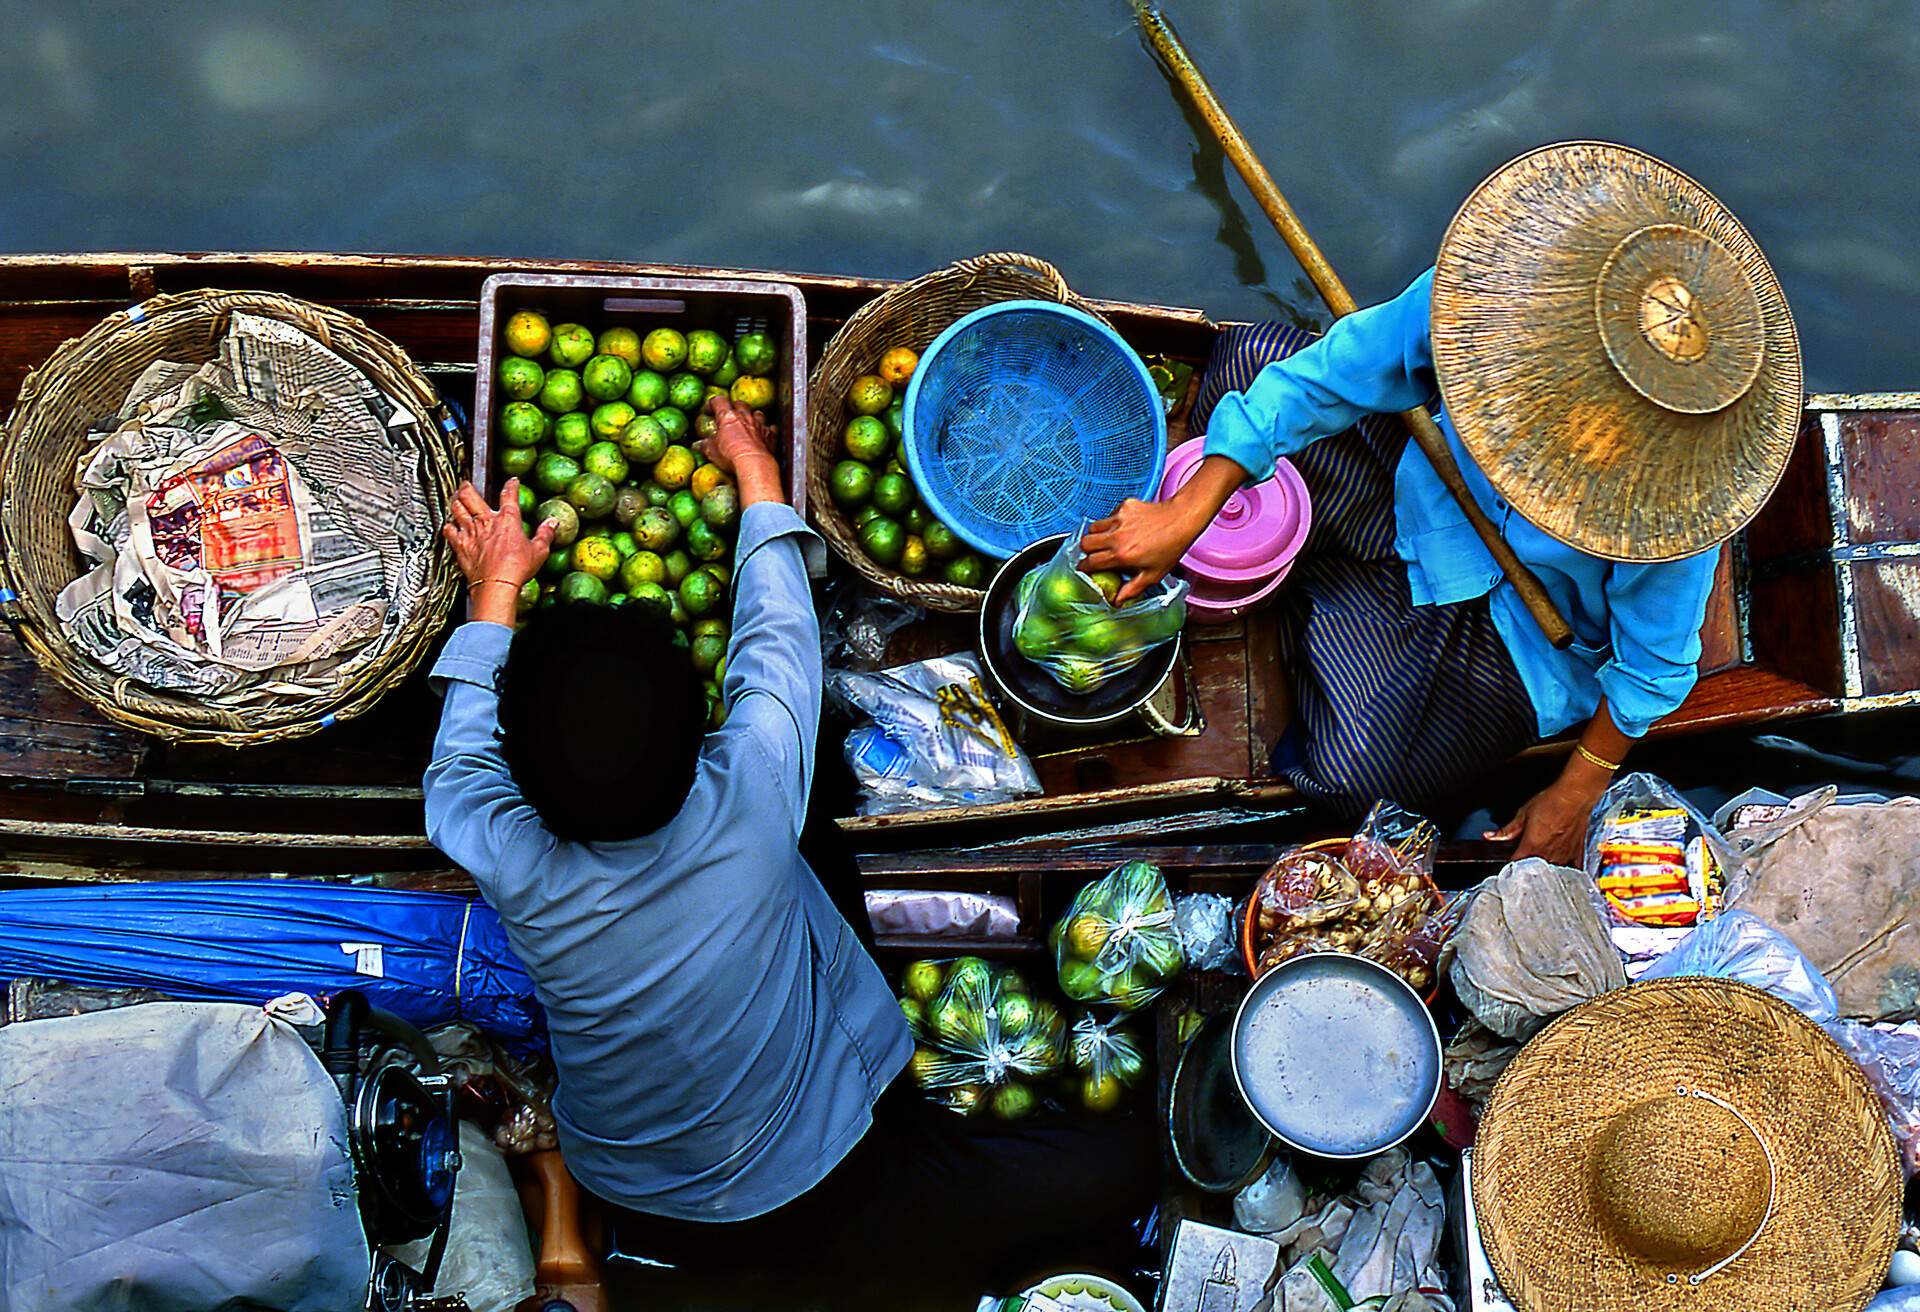 Two vendors selling fruits on a floating market.